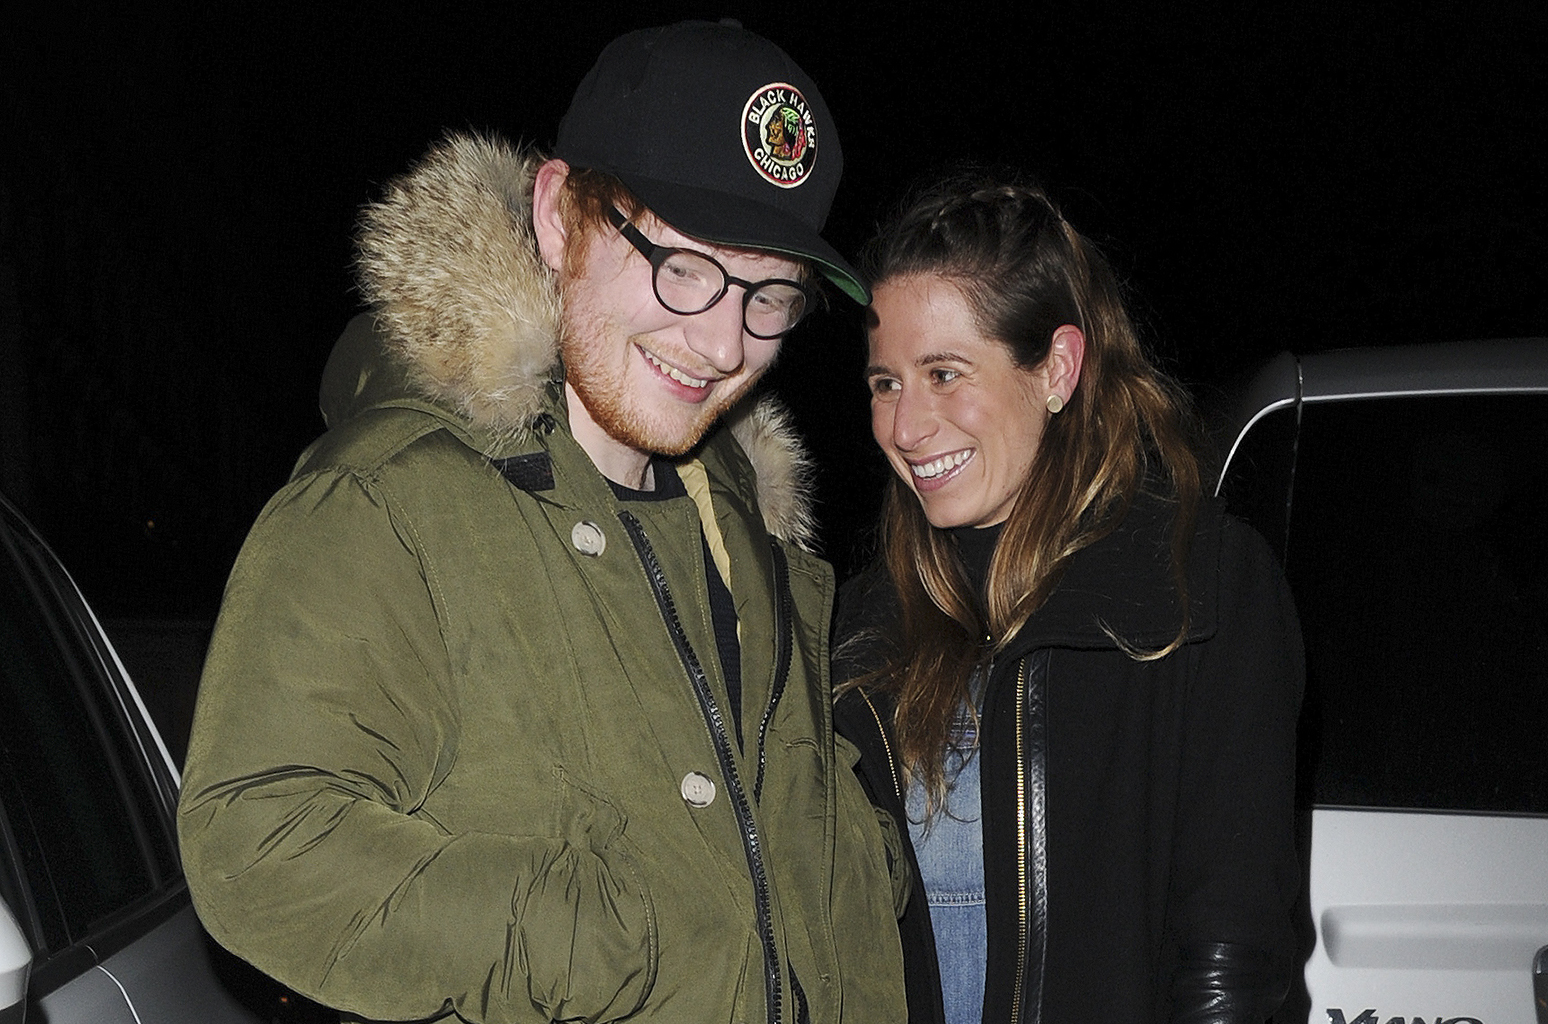  Ed Sheeran et Cherry Seaborn @ Getty Images